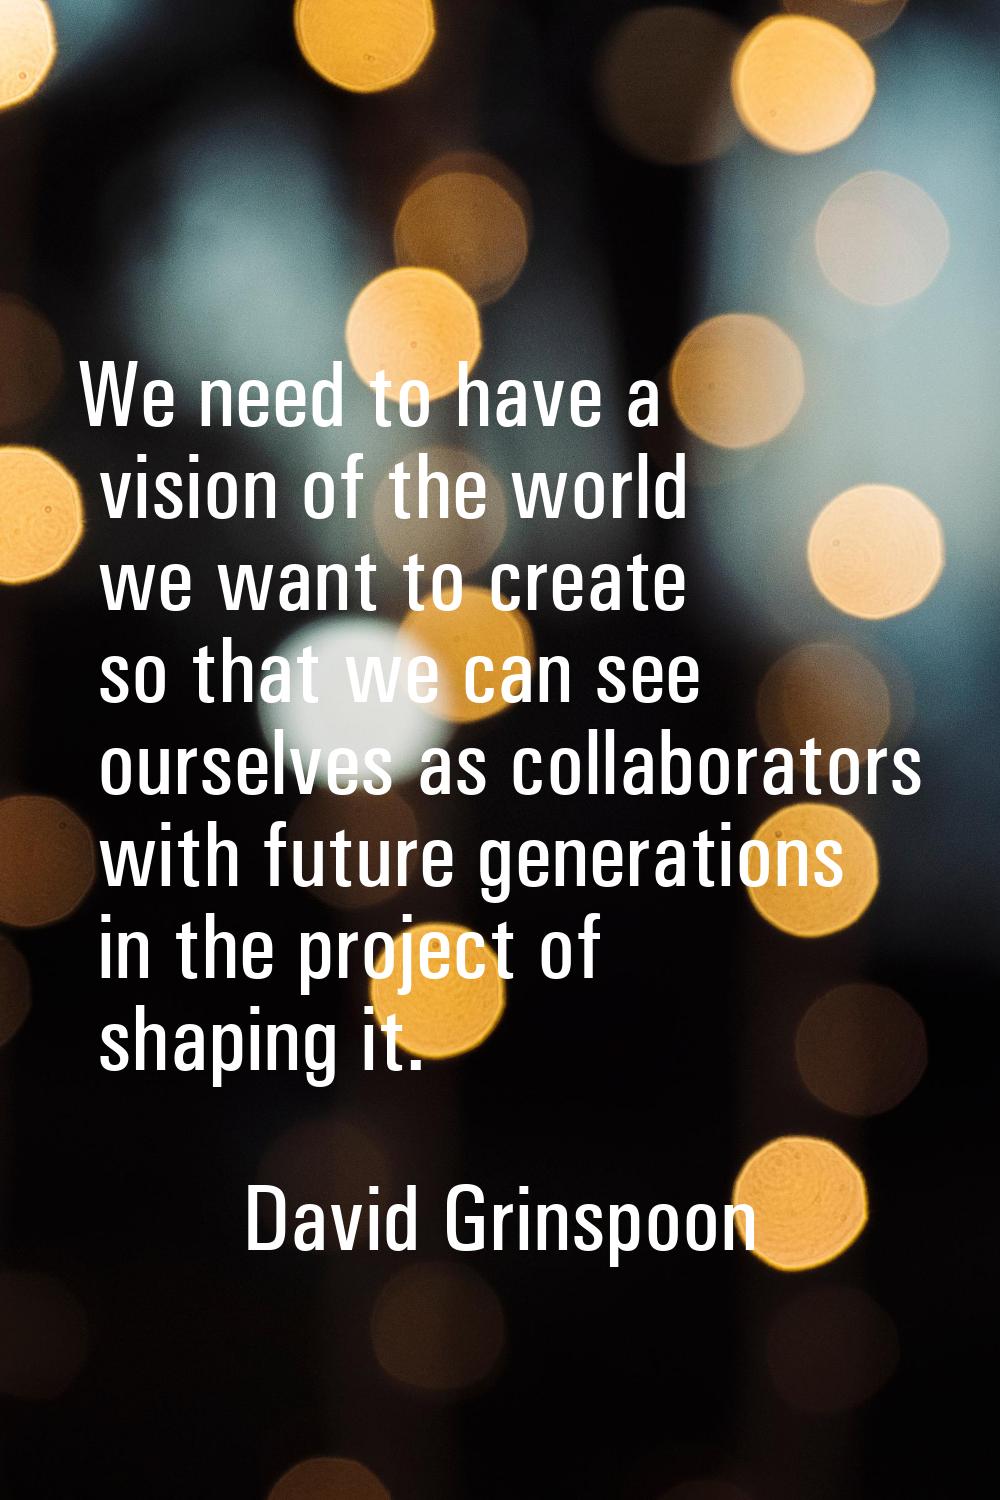 We need to have a vision of the world we want to create so that we can see ourselves as collaborato